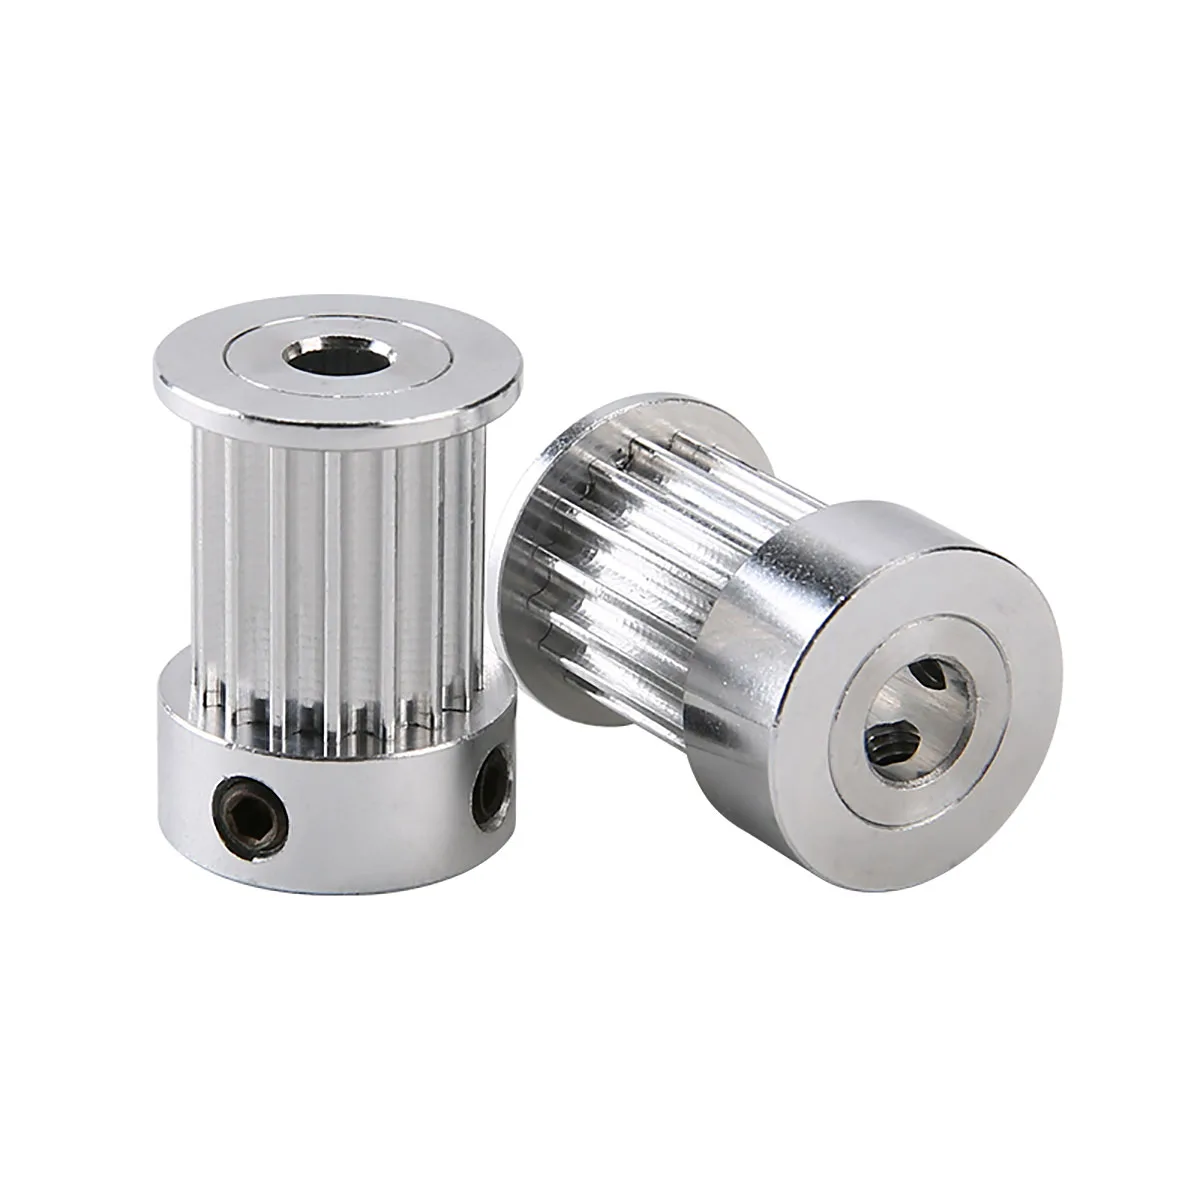 K type 28 Teeth HTD 3M Timing Pulley Bore 14mm 15mm 16mm 17mm 18mm 19mm, For Width 15mm Belt Used In Linear Pulley